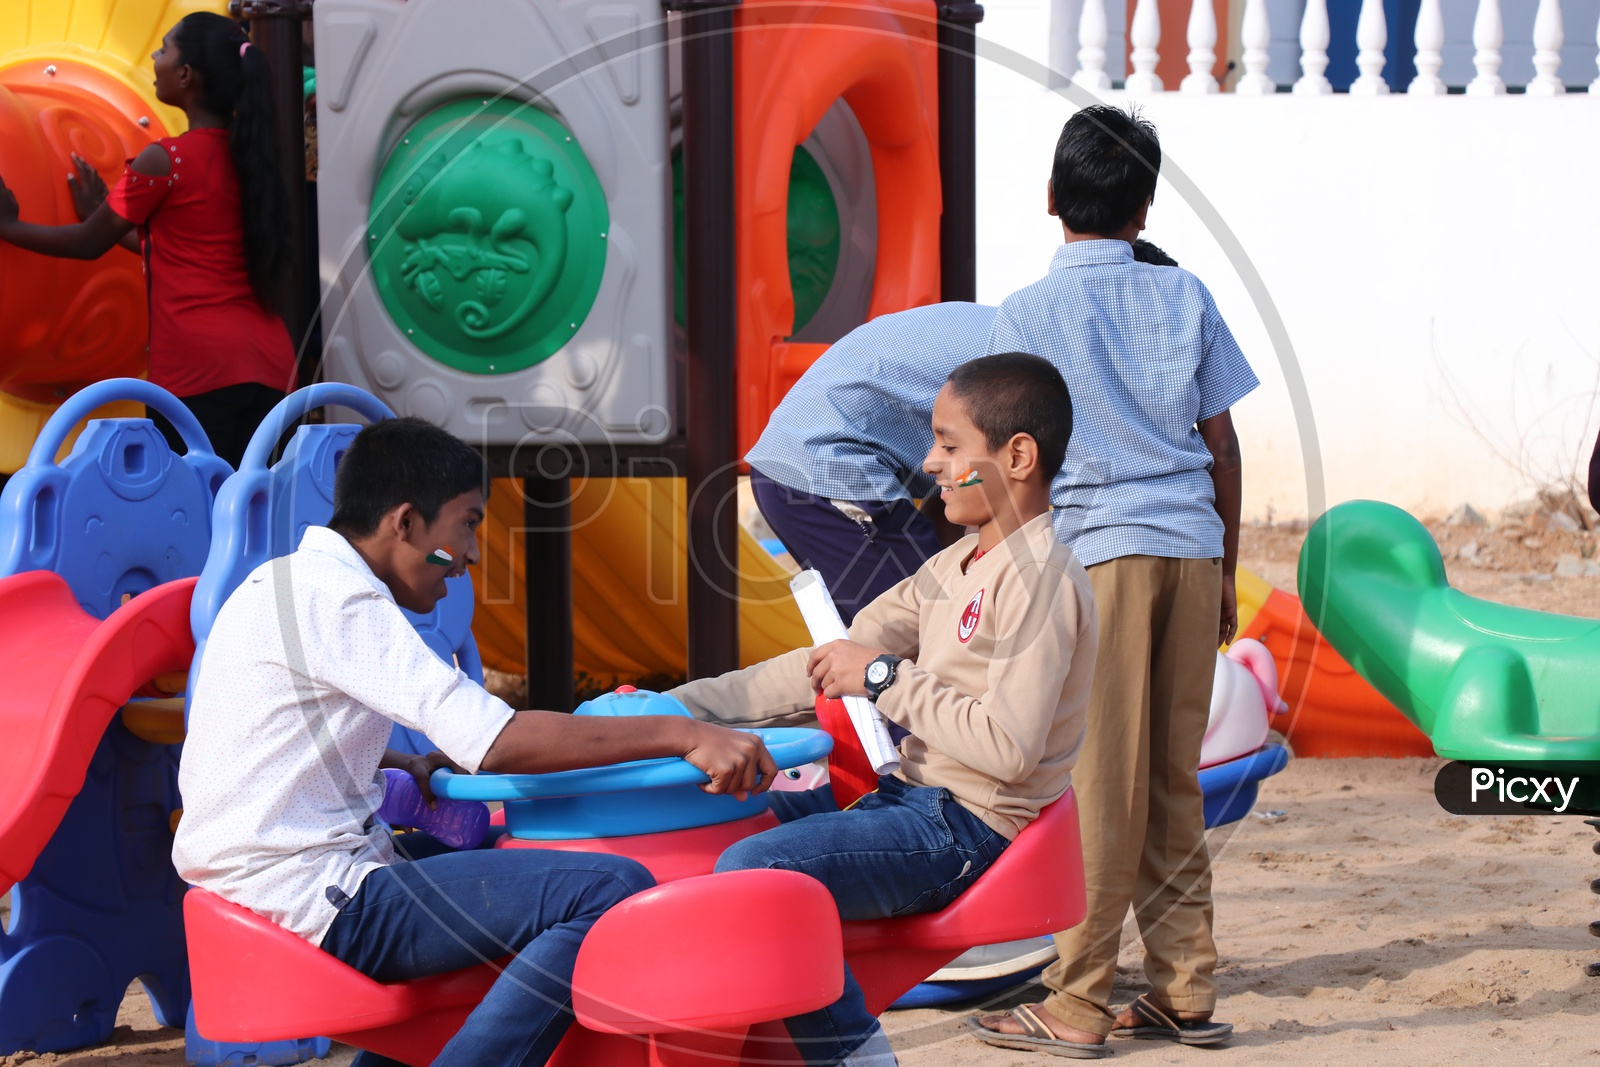 Children Playing With   Equipment in  Playing area  in a Park